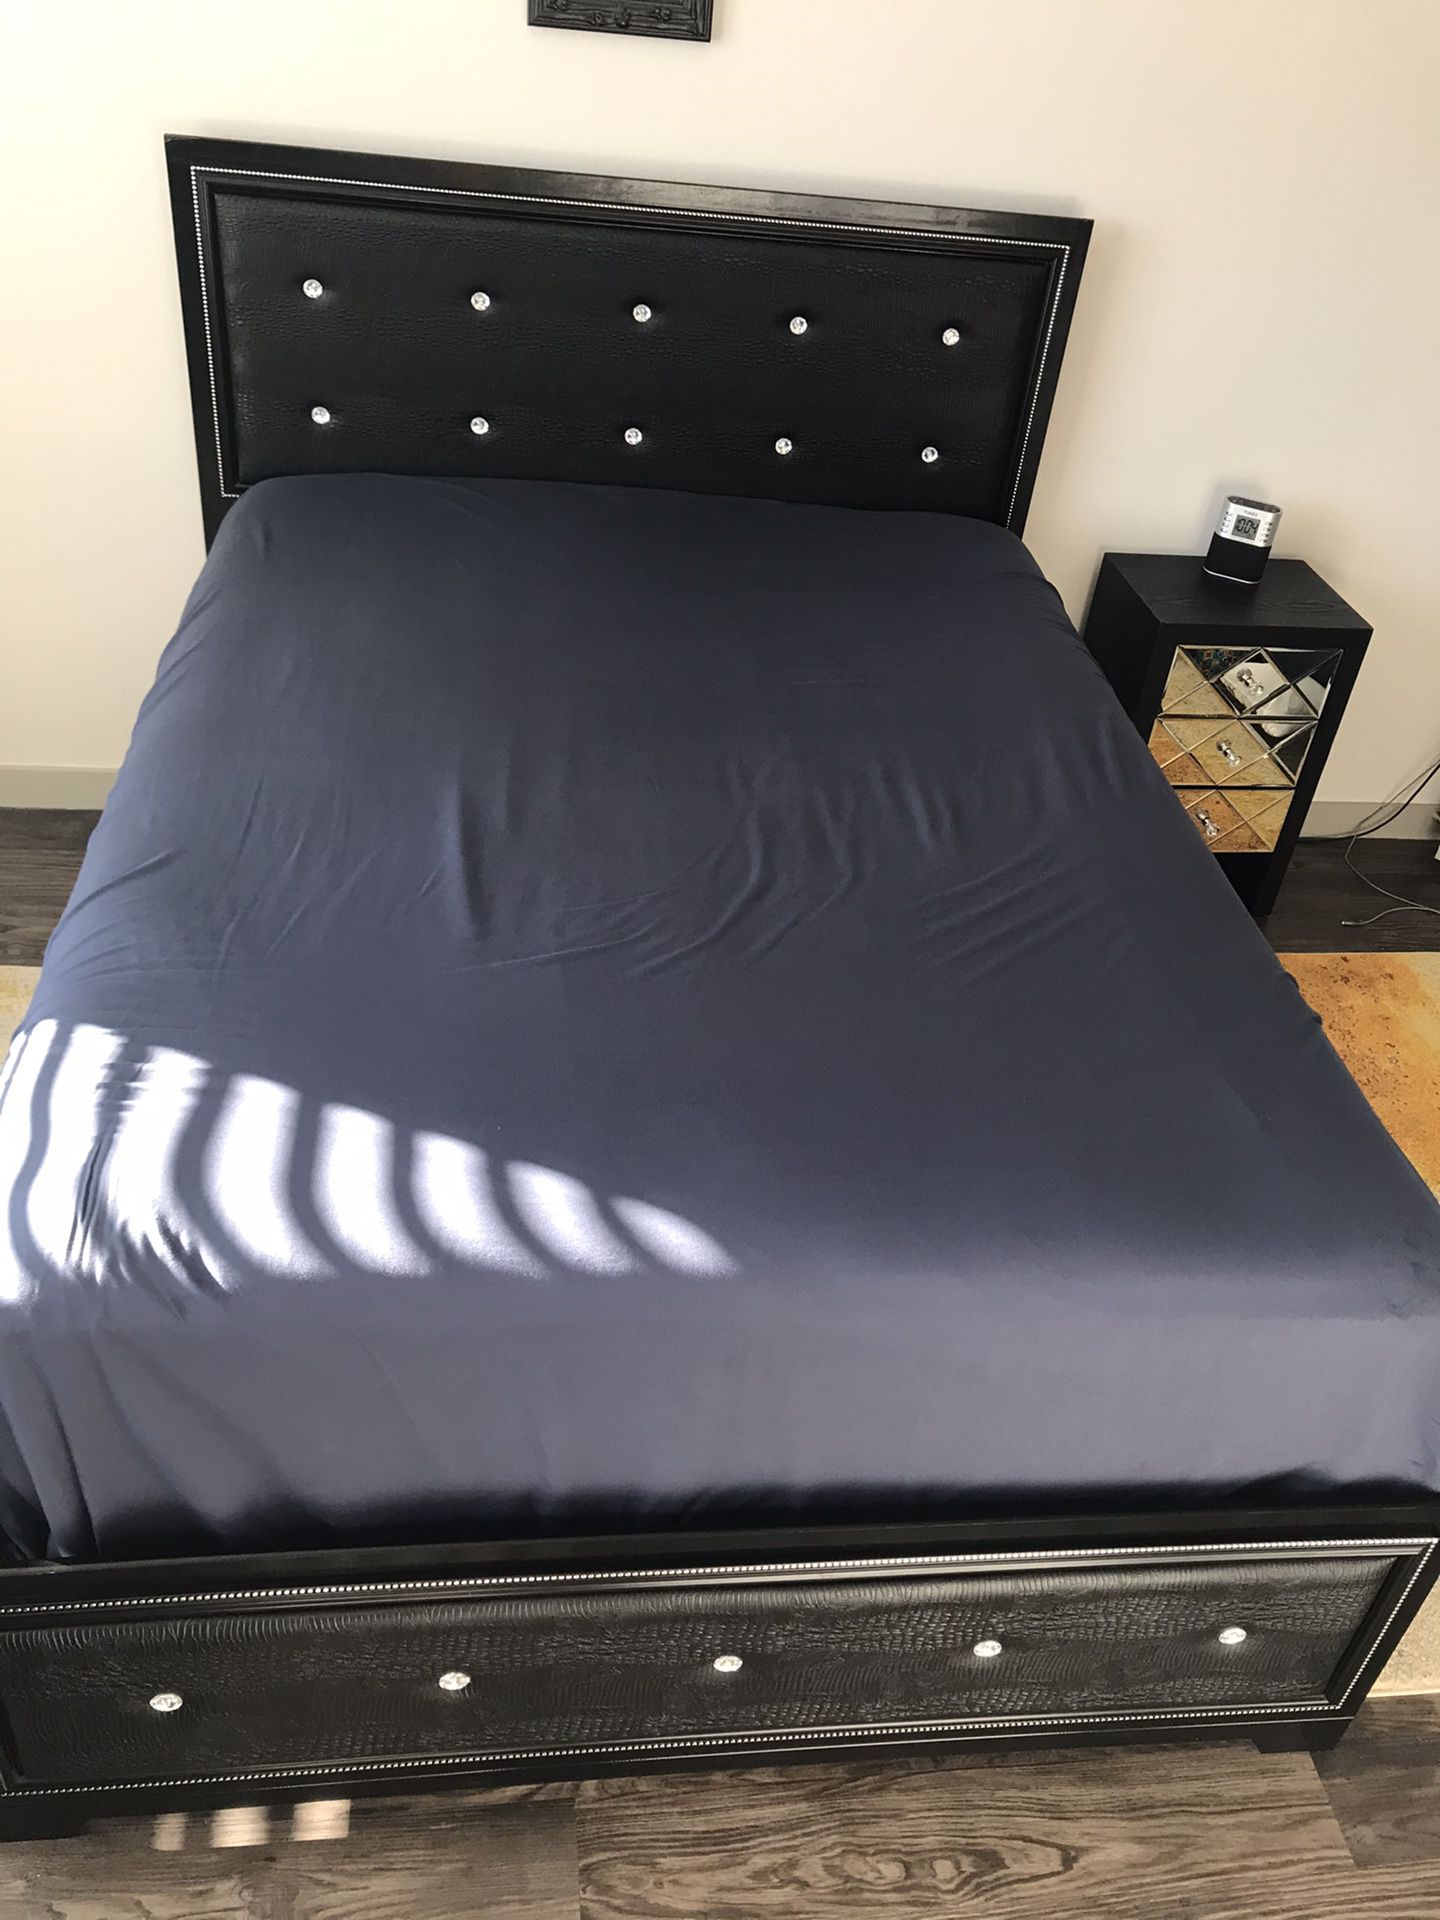 Queen Bed frame with mattress and box spring—PICK UP TODAY ASAP